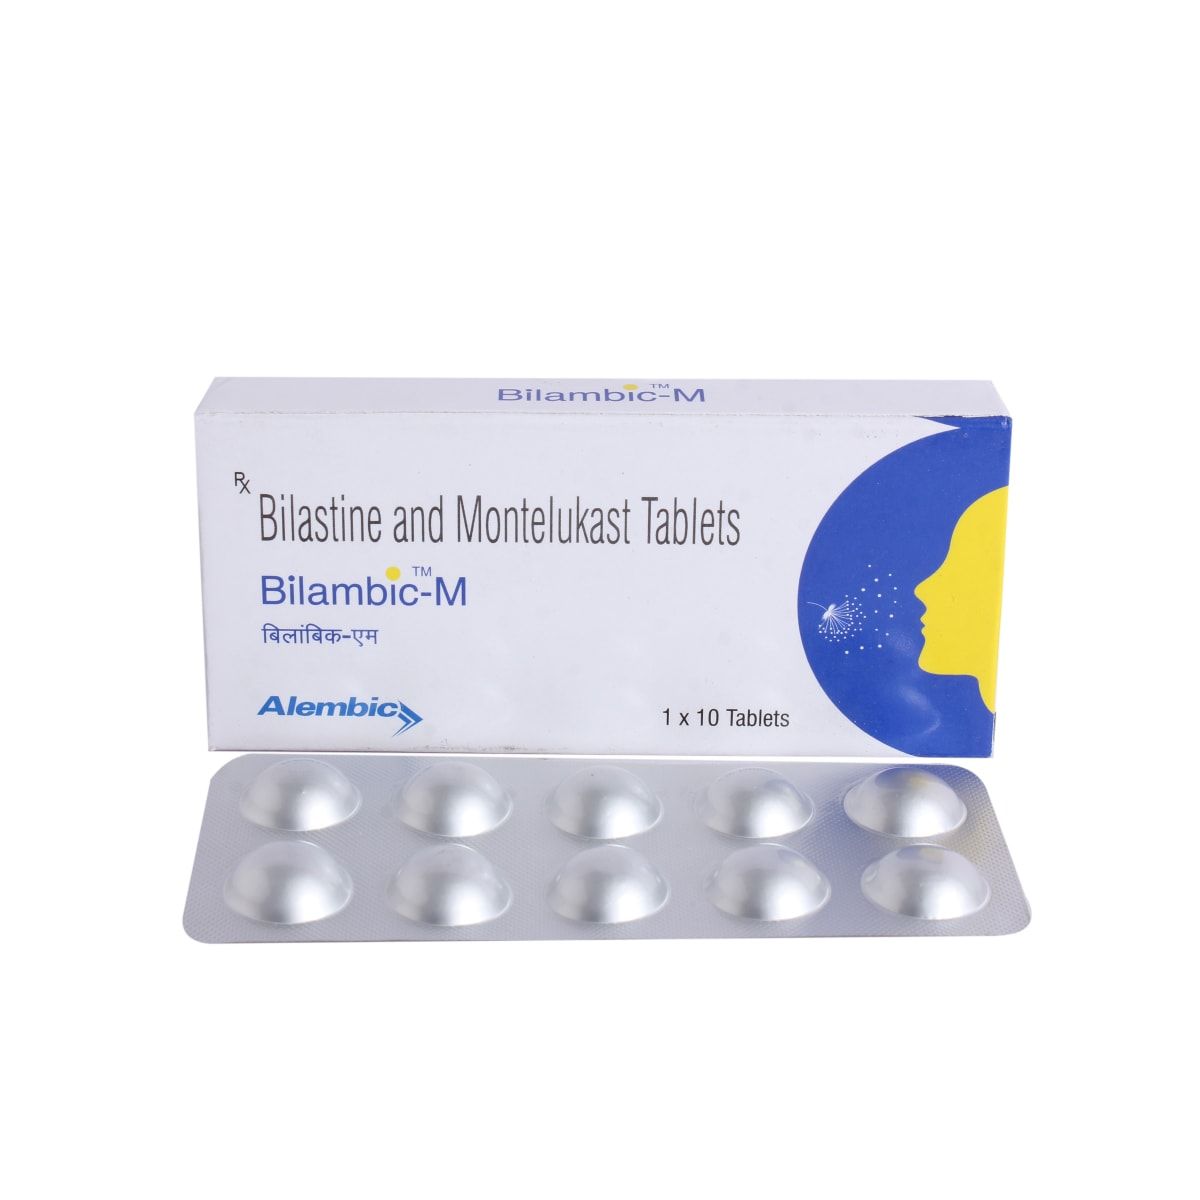 Bilambic-M Tablet 10's Price, Uses, Side Effects, Composition ...